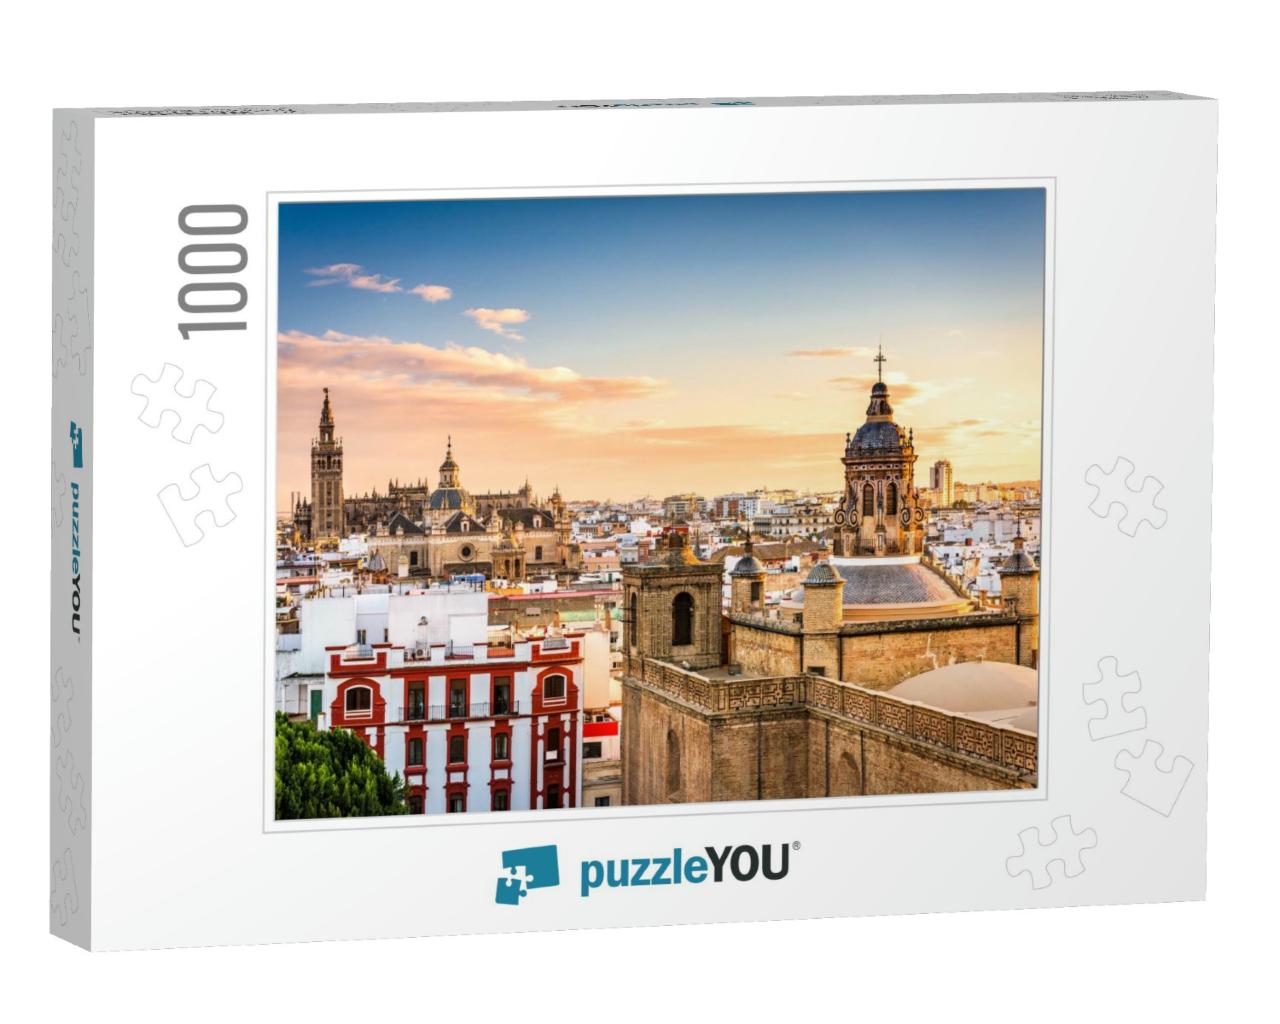 Seville, Spain Skyline in the Old Quarter... Jigsaw Puzzle with 1000 pieces